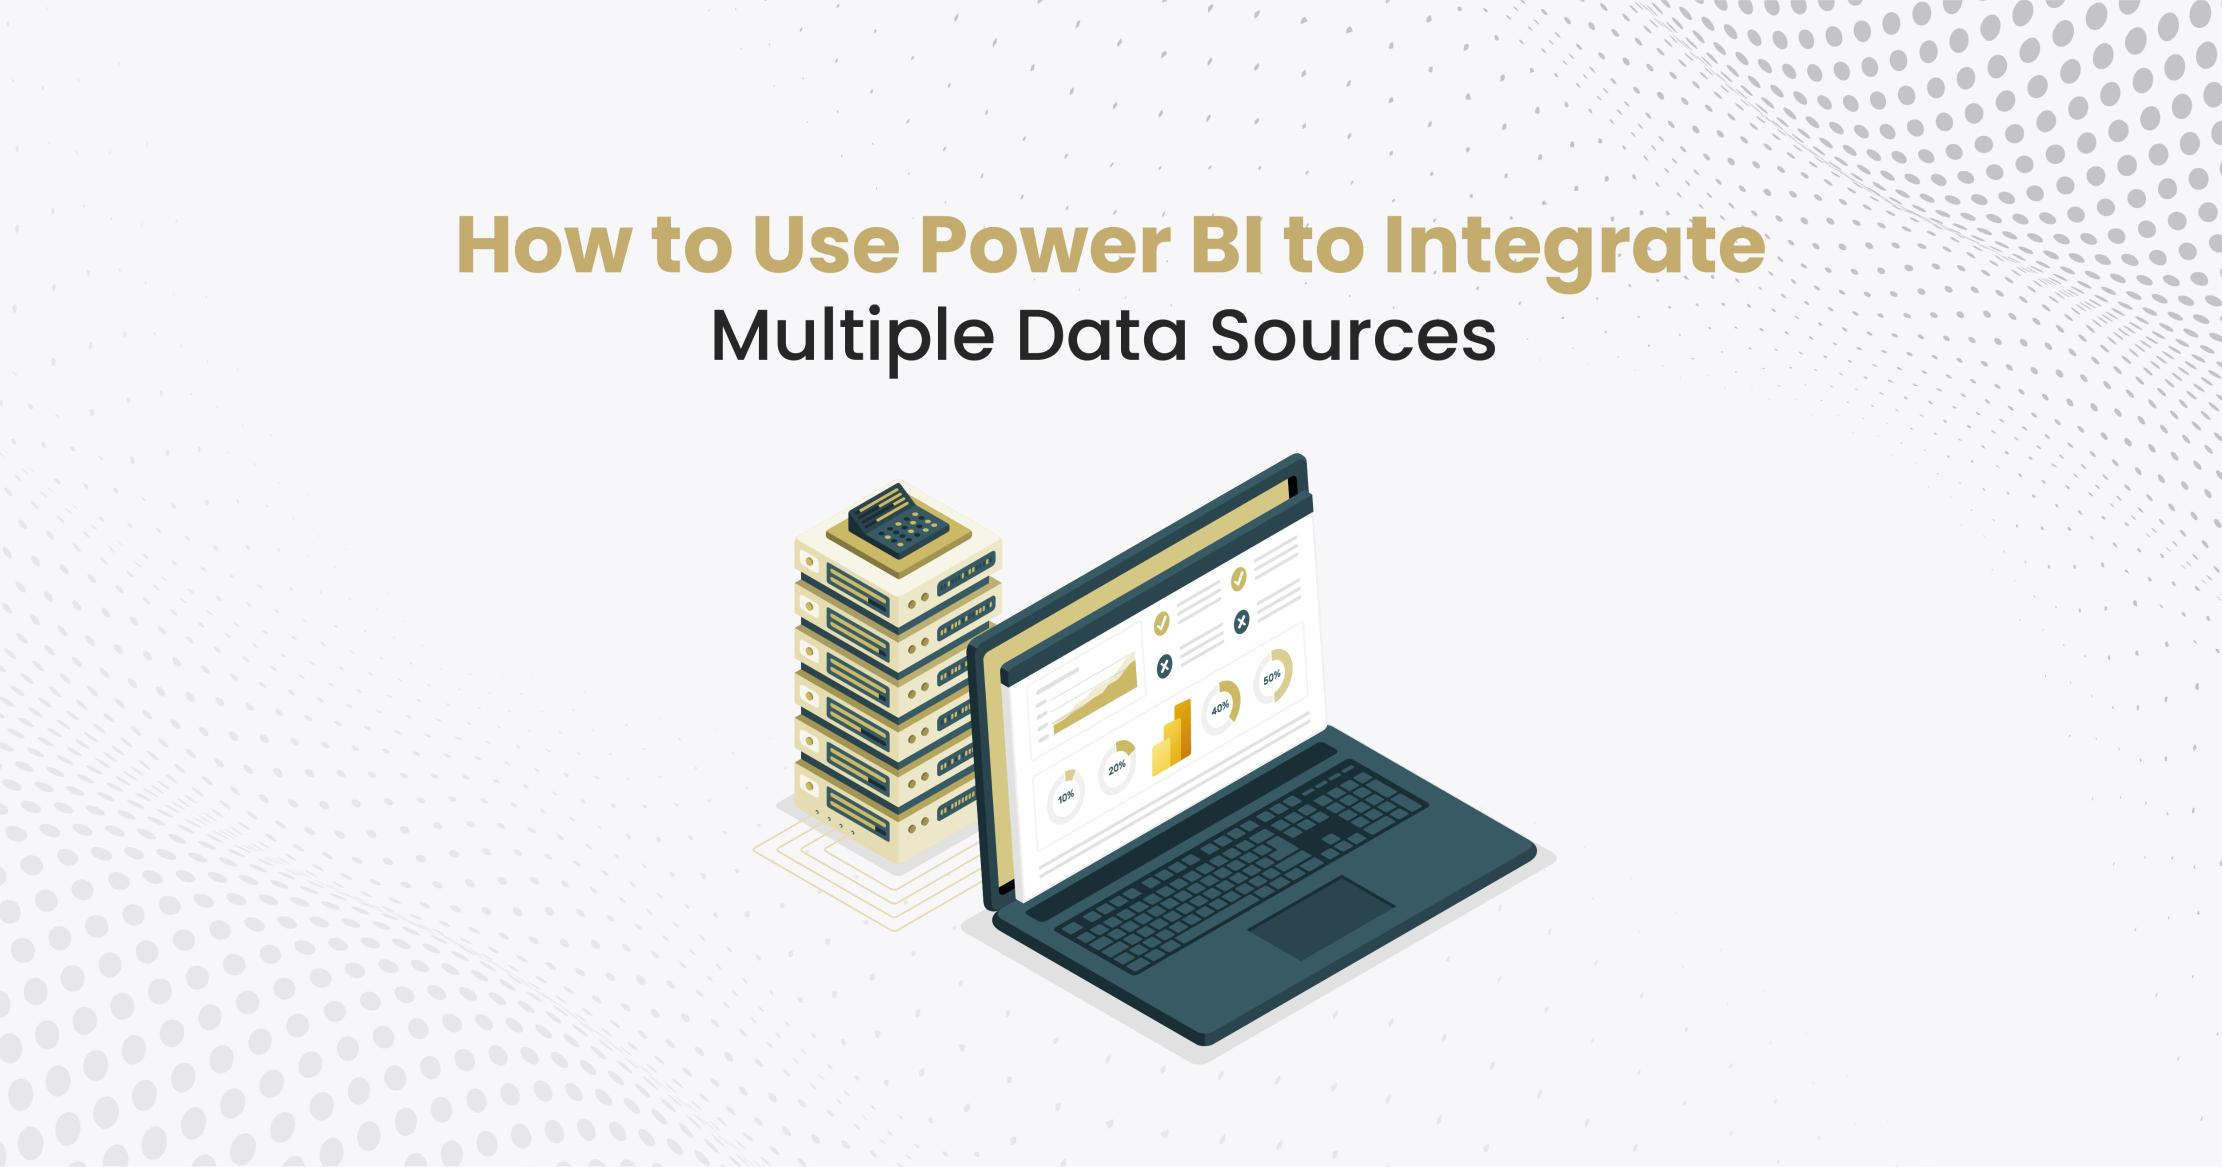 How to Use Power BI to Integrate Multiple Data Sources